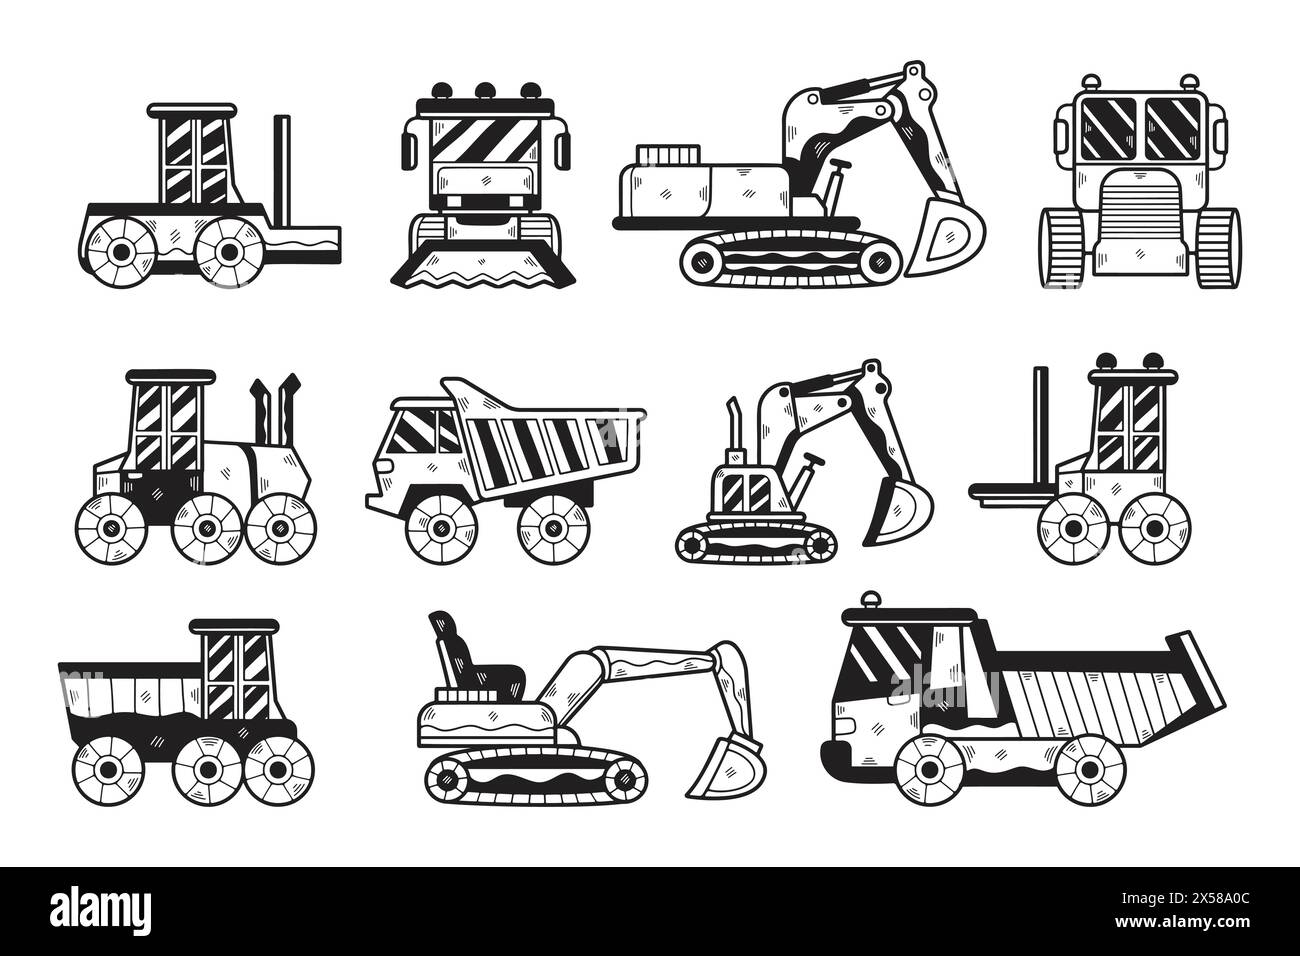 A collection of black and white drawings of construction vehicles. The vehicles include a bulldozer, a dump truck, a crane, and a forklift. The drawin Stock Vector